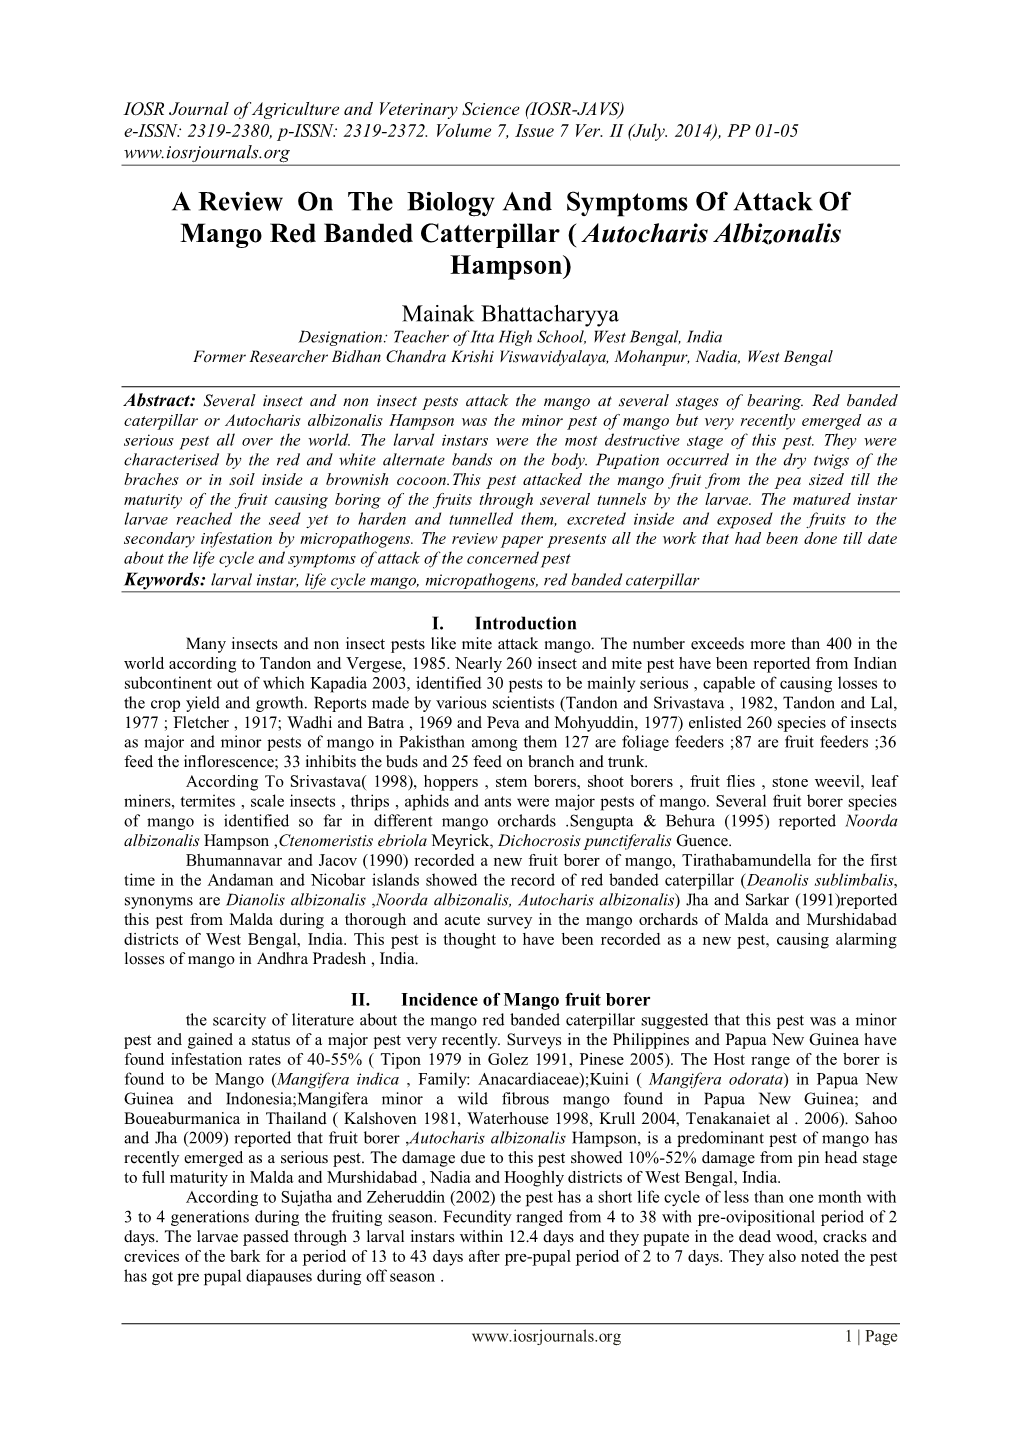 A Review on the Biology and Symptoms of Attack of Mango Red Banded Catterpillar ( Autocharis Albizonalis Hampson)